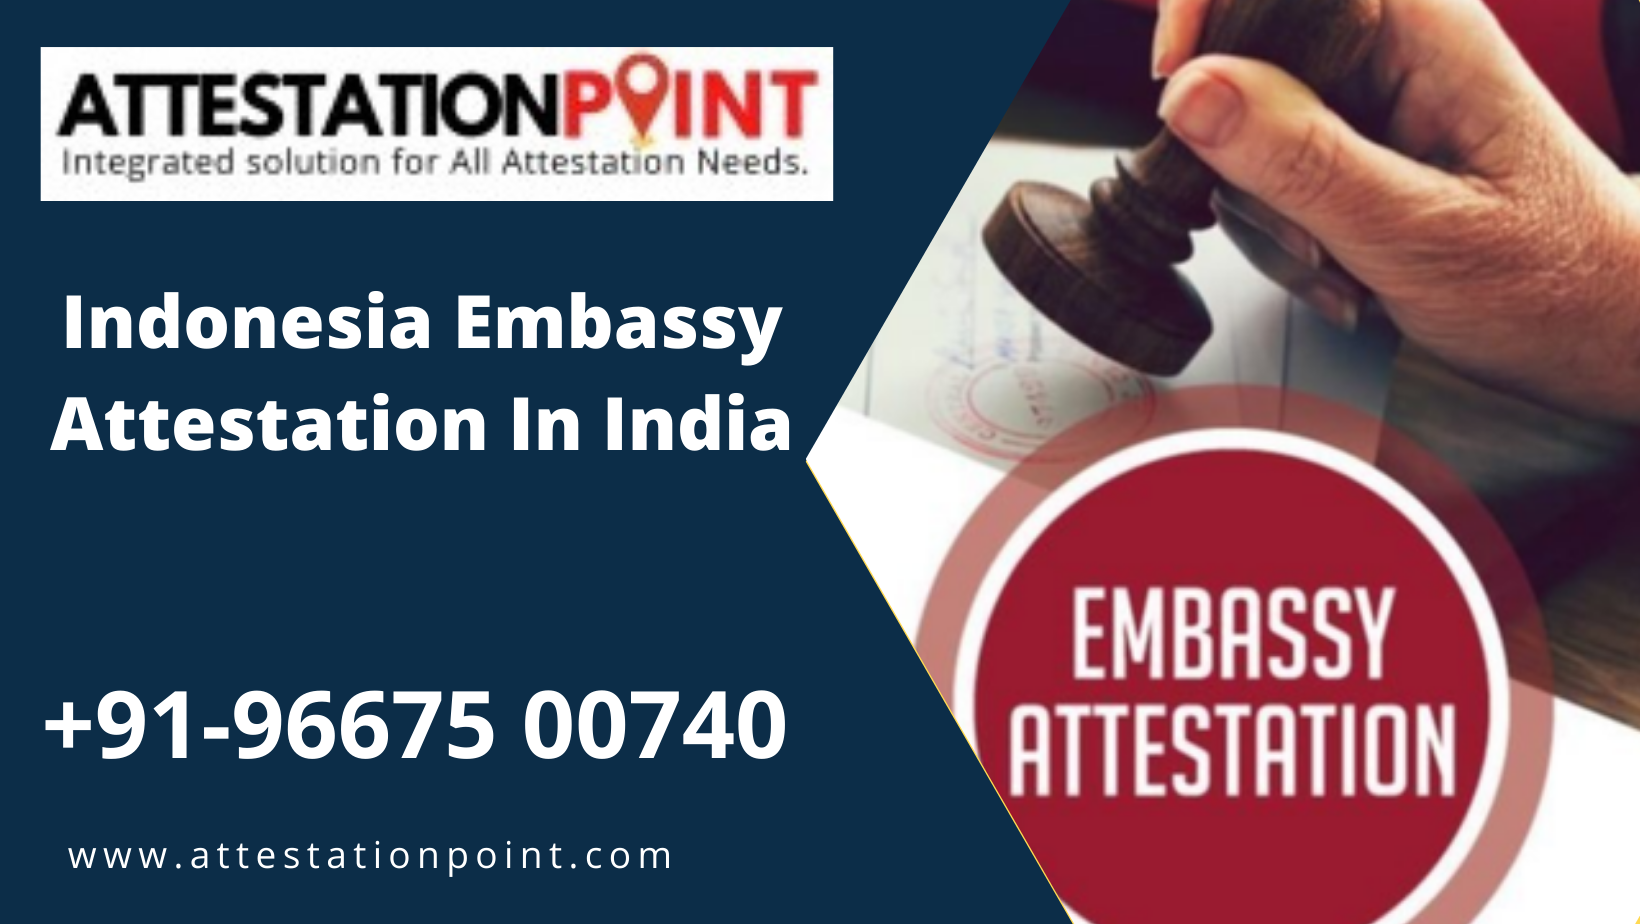 Indonesia Embassy Attestation In India